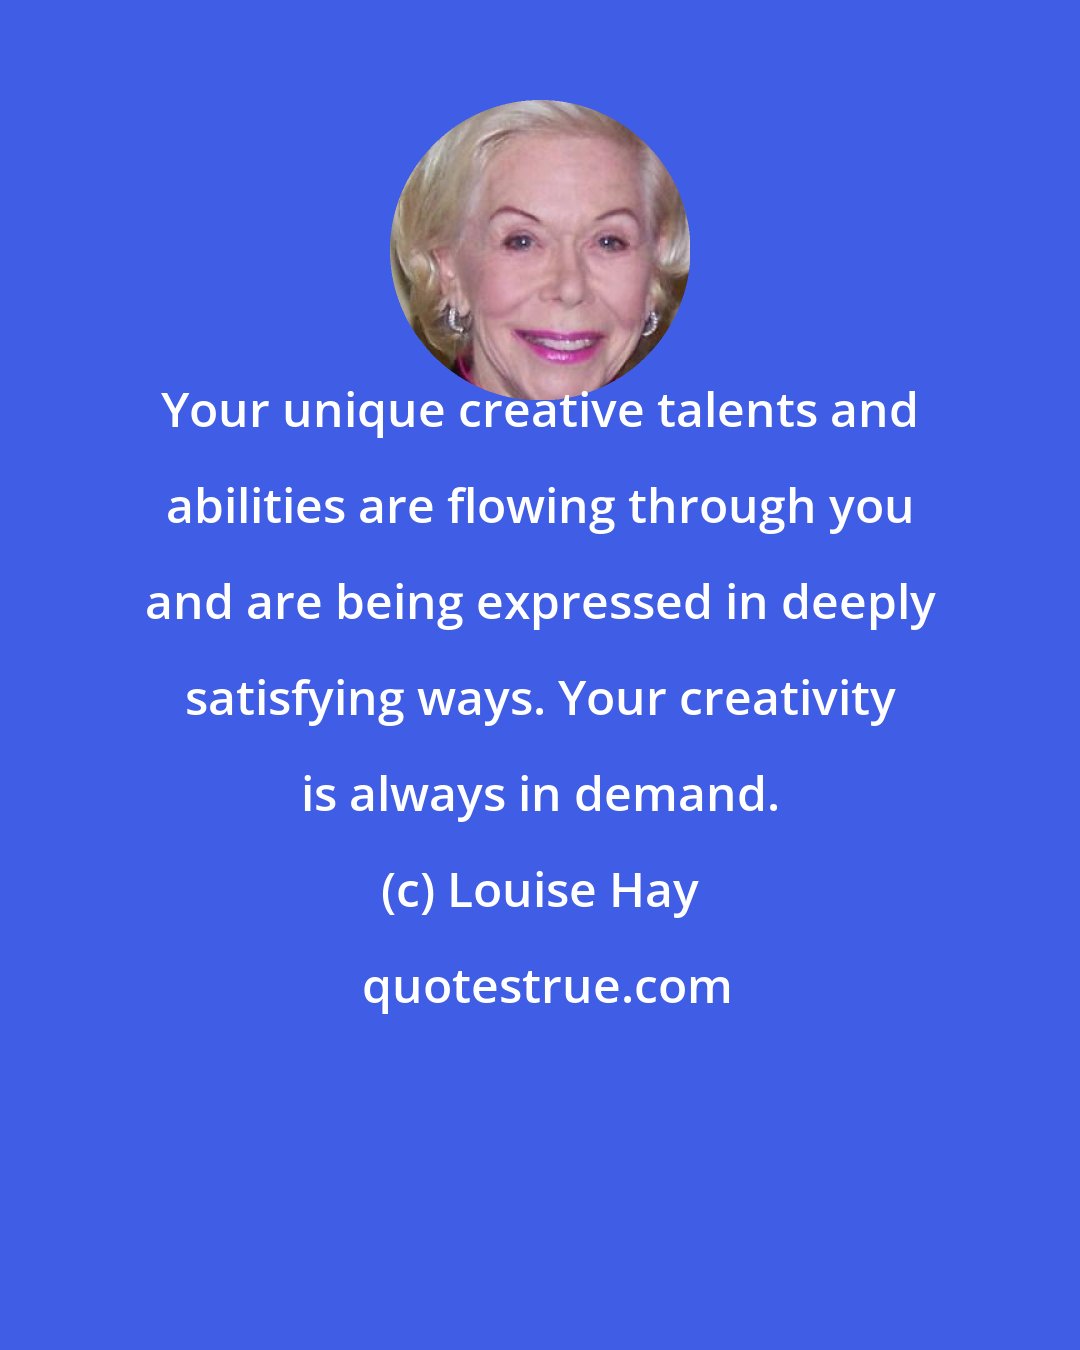 Louise Hay: Your unique creative talents and abilities are flowing through you and are being expressed in deeply satisfying ways. Your creativity is always in demand.